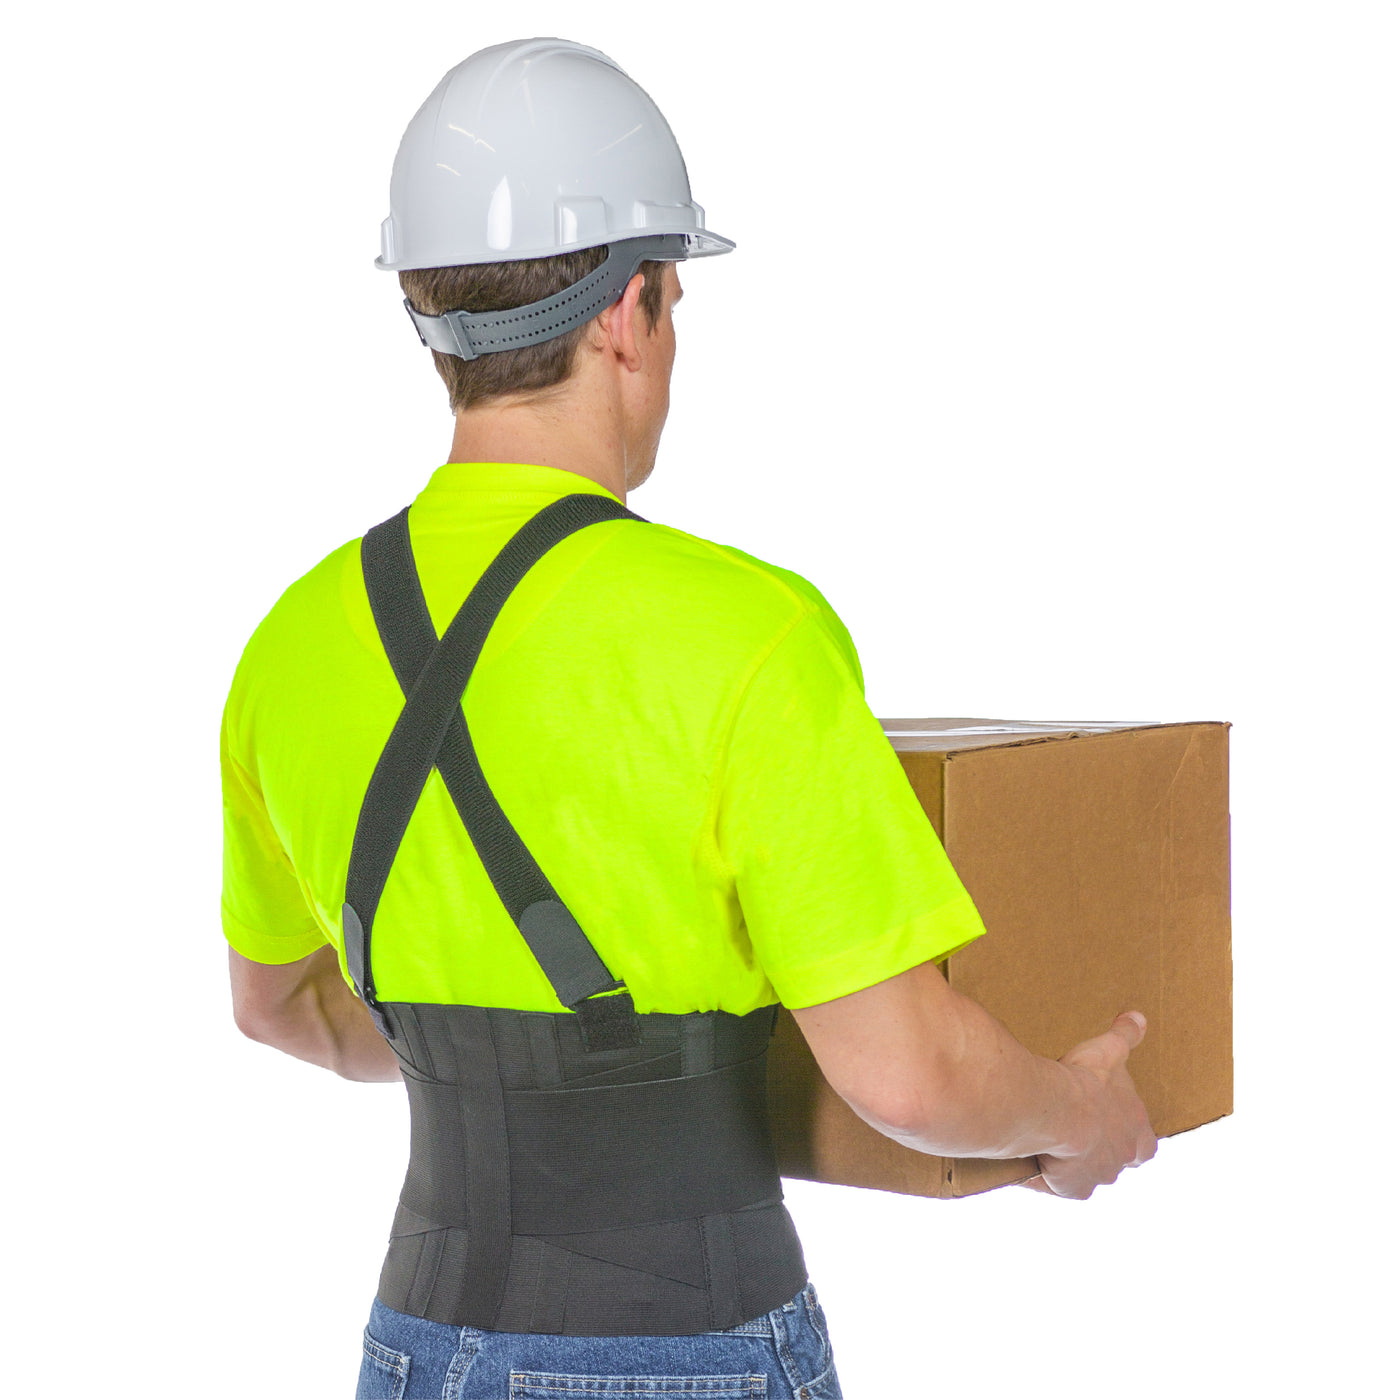 The back brace for heavy lifting supports the tissues of the lumbar back and promotes proper lifting techniques, reducing stress on the back and easing pain.